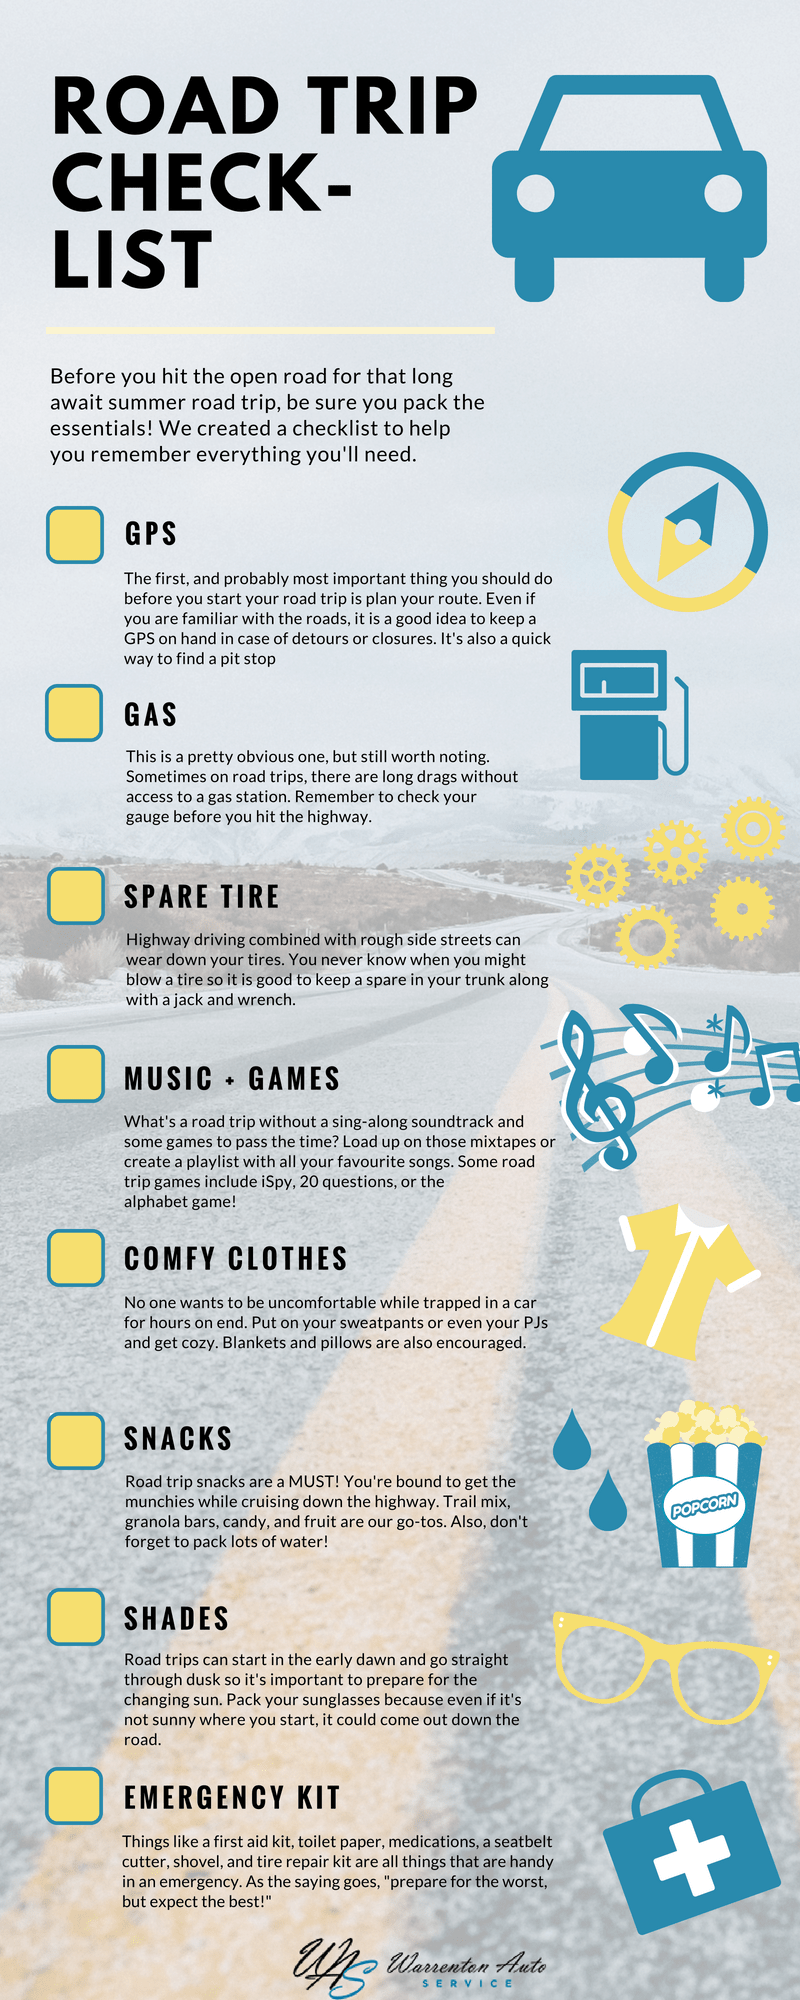 Infographic Road Trip Check-List includes GPS, Gas, Spare Tire, Music & Games, Comfy Clothes, Snacks, Shades, and Emergency Kit